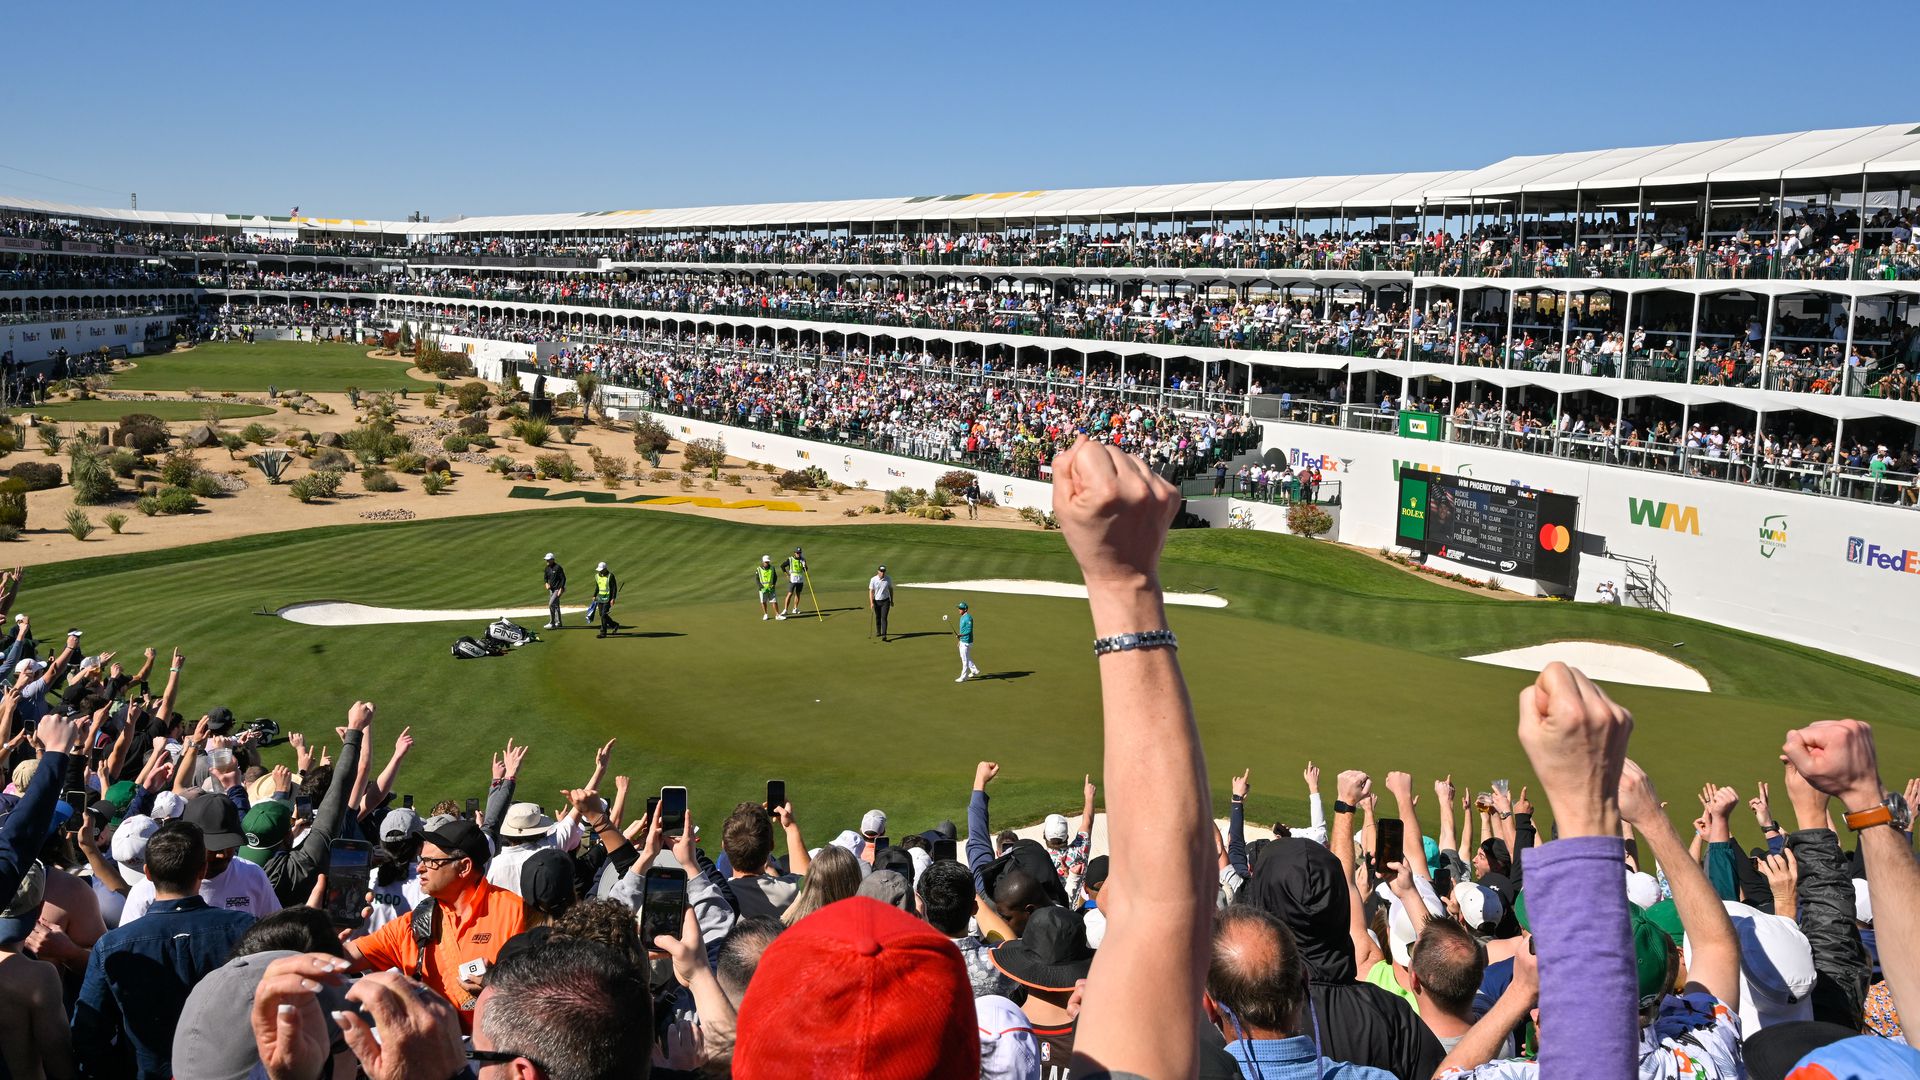 phoenix open turns fans with tickets away, stop alcohol sales as crowd numbers surge